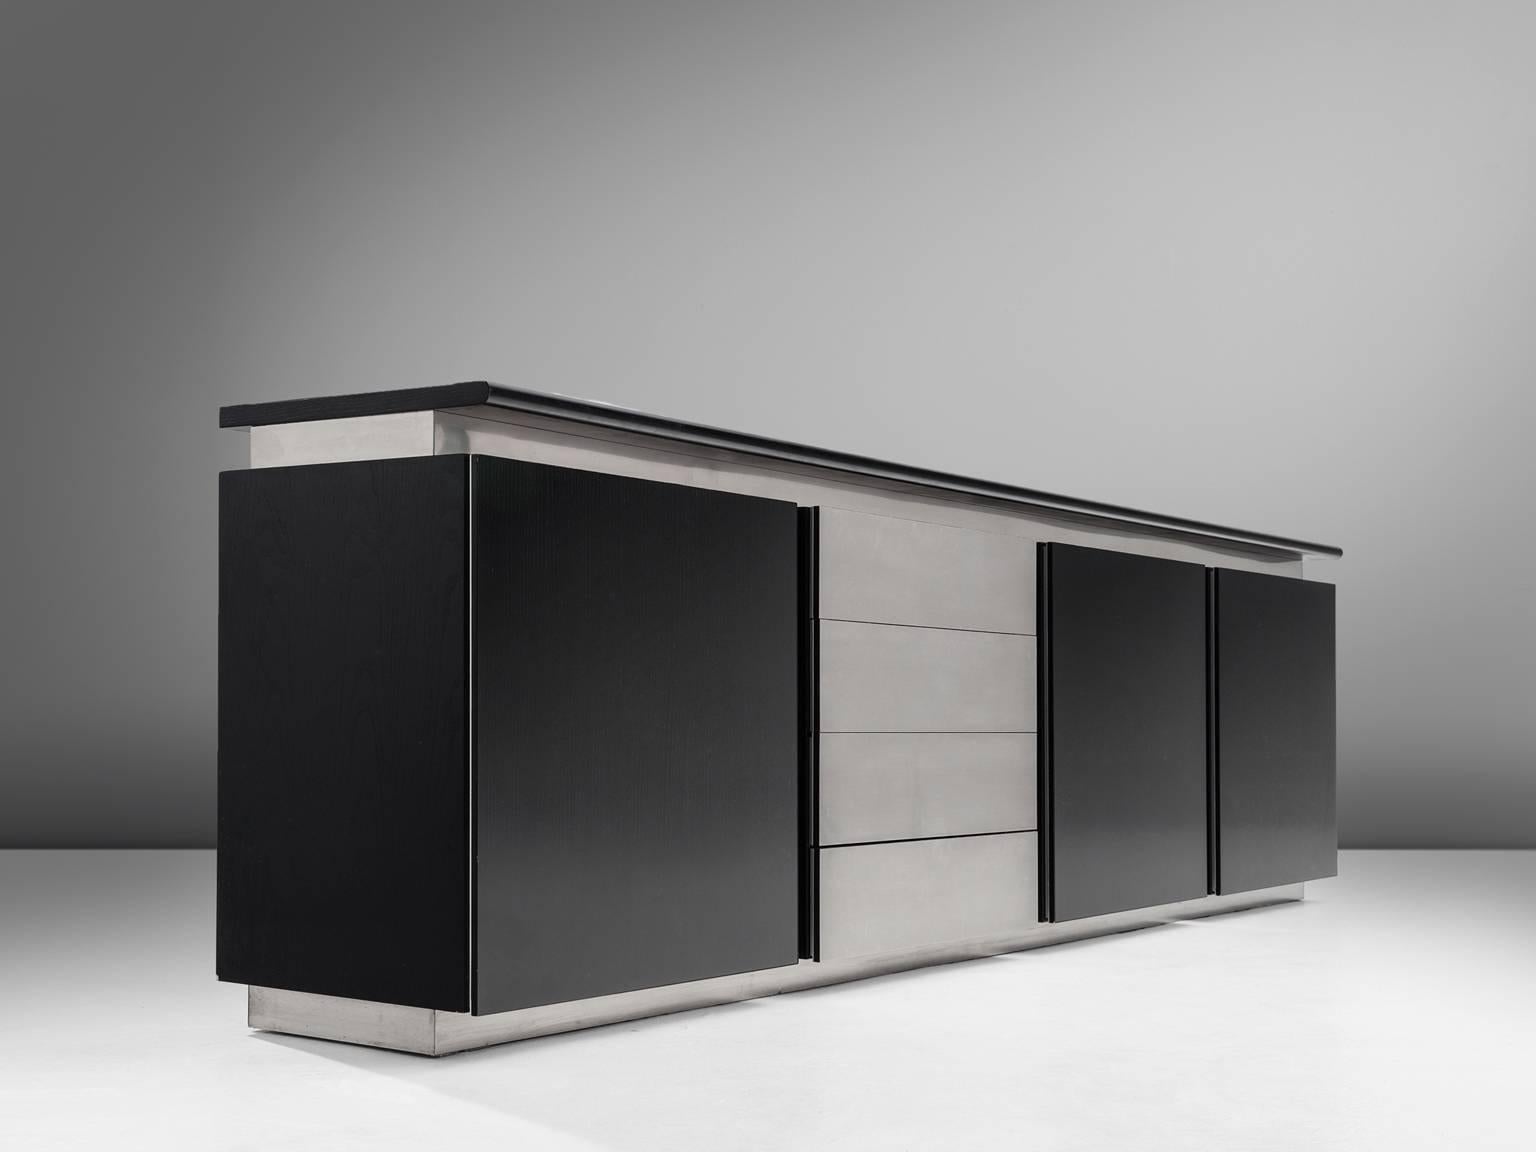 Ludovico Acerbis for Acerbis, sideboard, black lacquered wood and steel, 1970s, Italy.

Sleek and modern credenza in stainless steel and stained oak is designed by Ludocivo Acerbis (1939). This cabinet has both a contemporary yet monumental